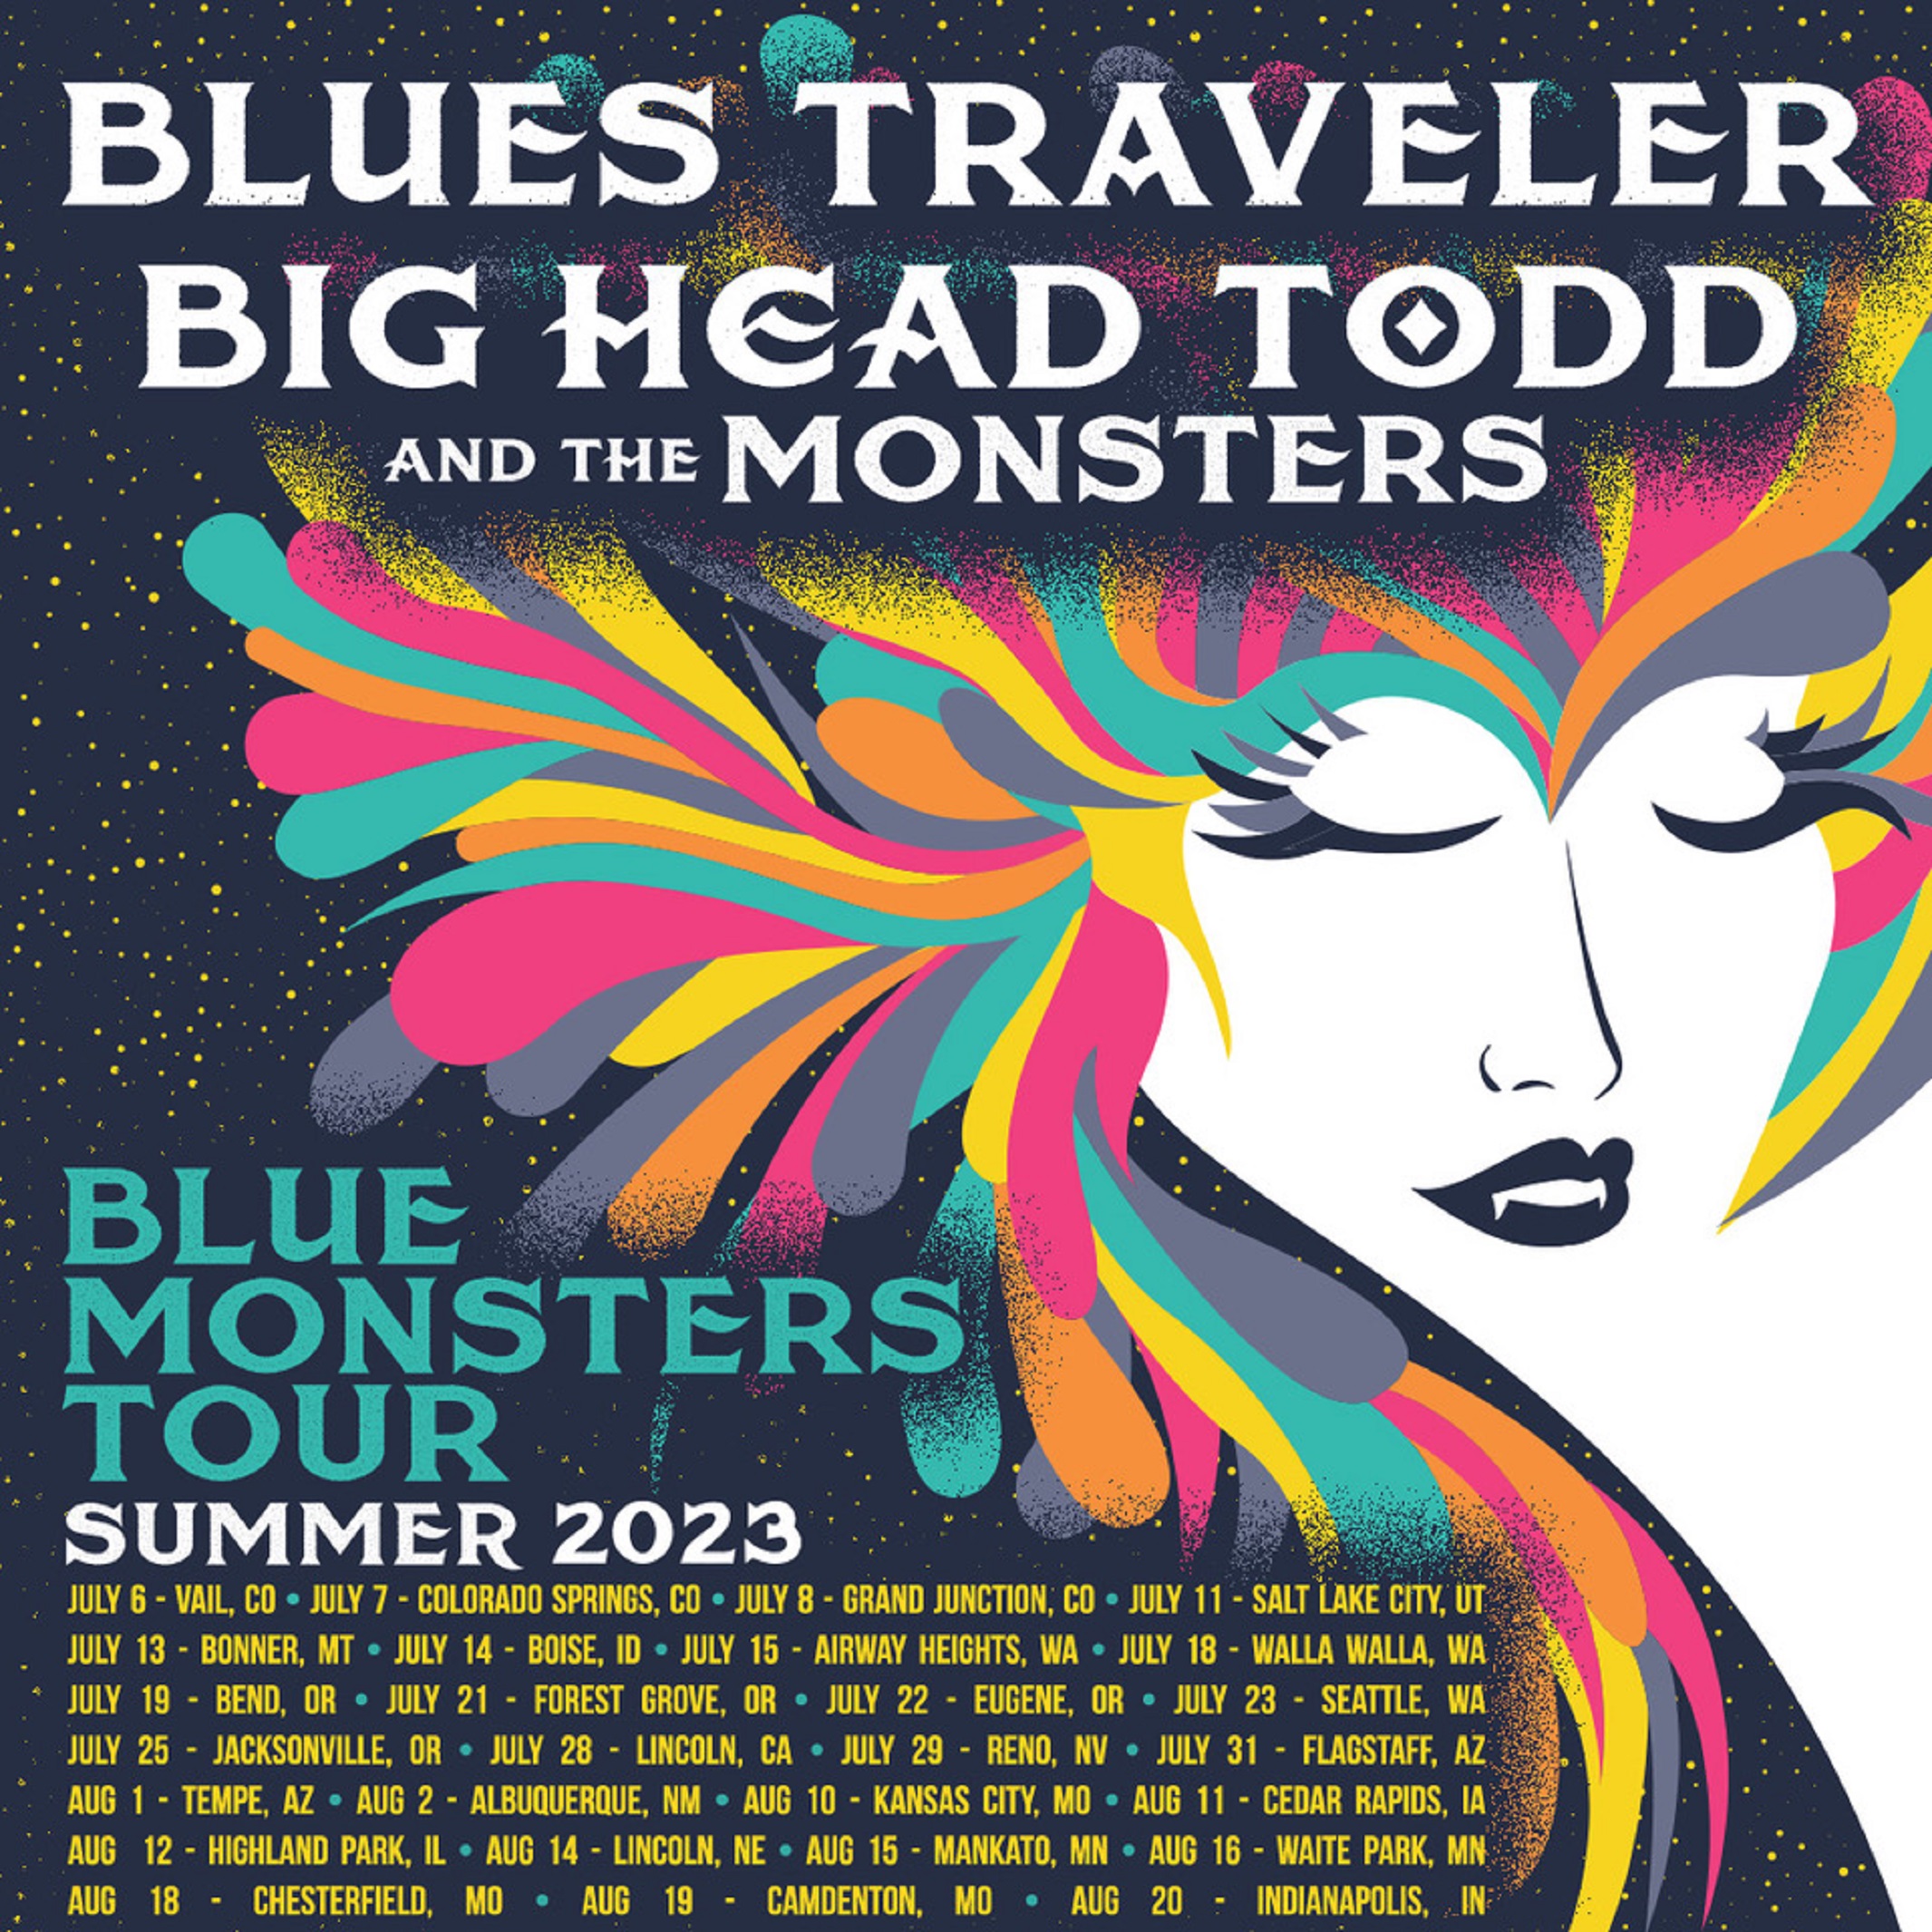 Blues Traveler & Big Head Todd & The Monsters Announce "Blue Monsters Tour"